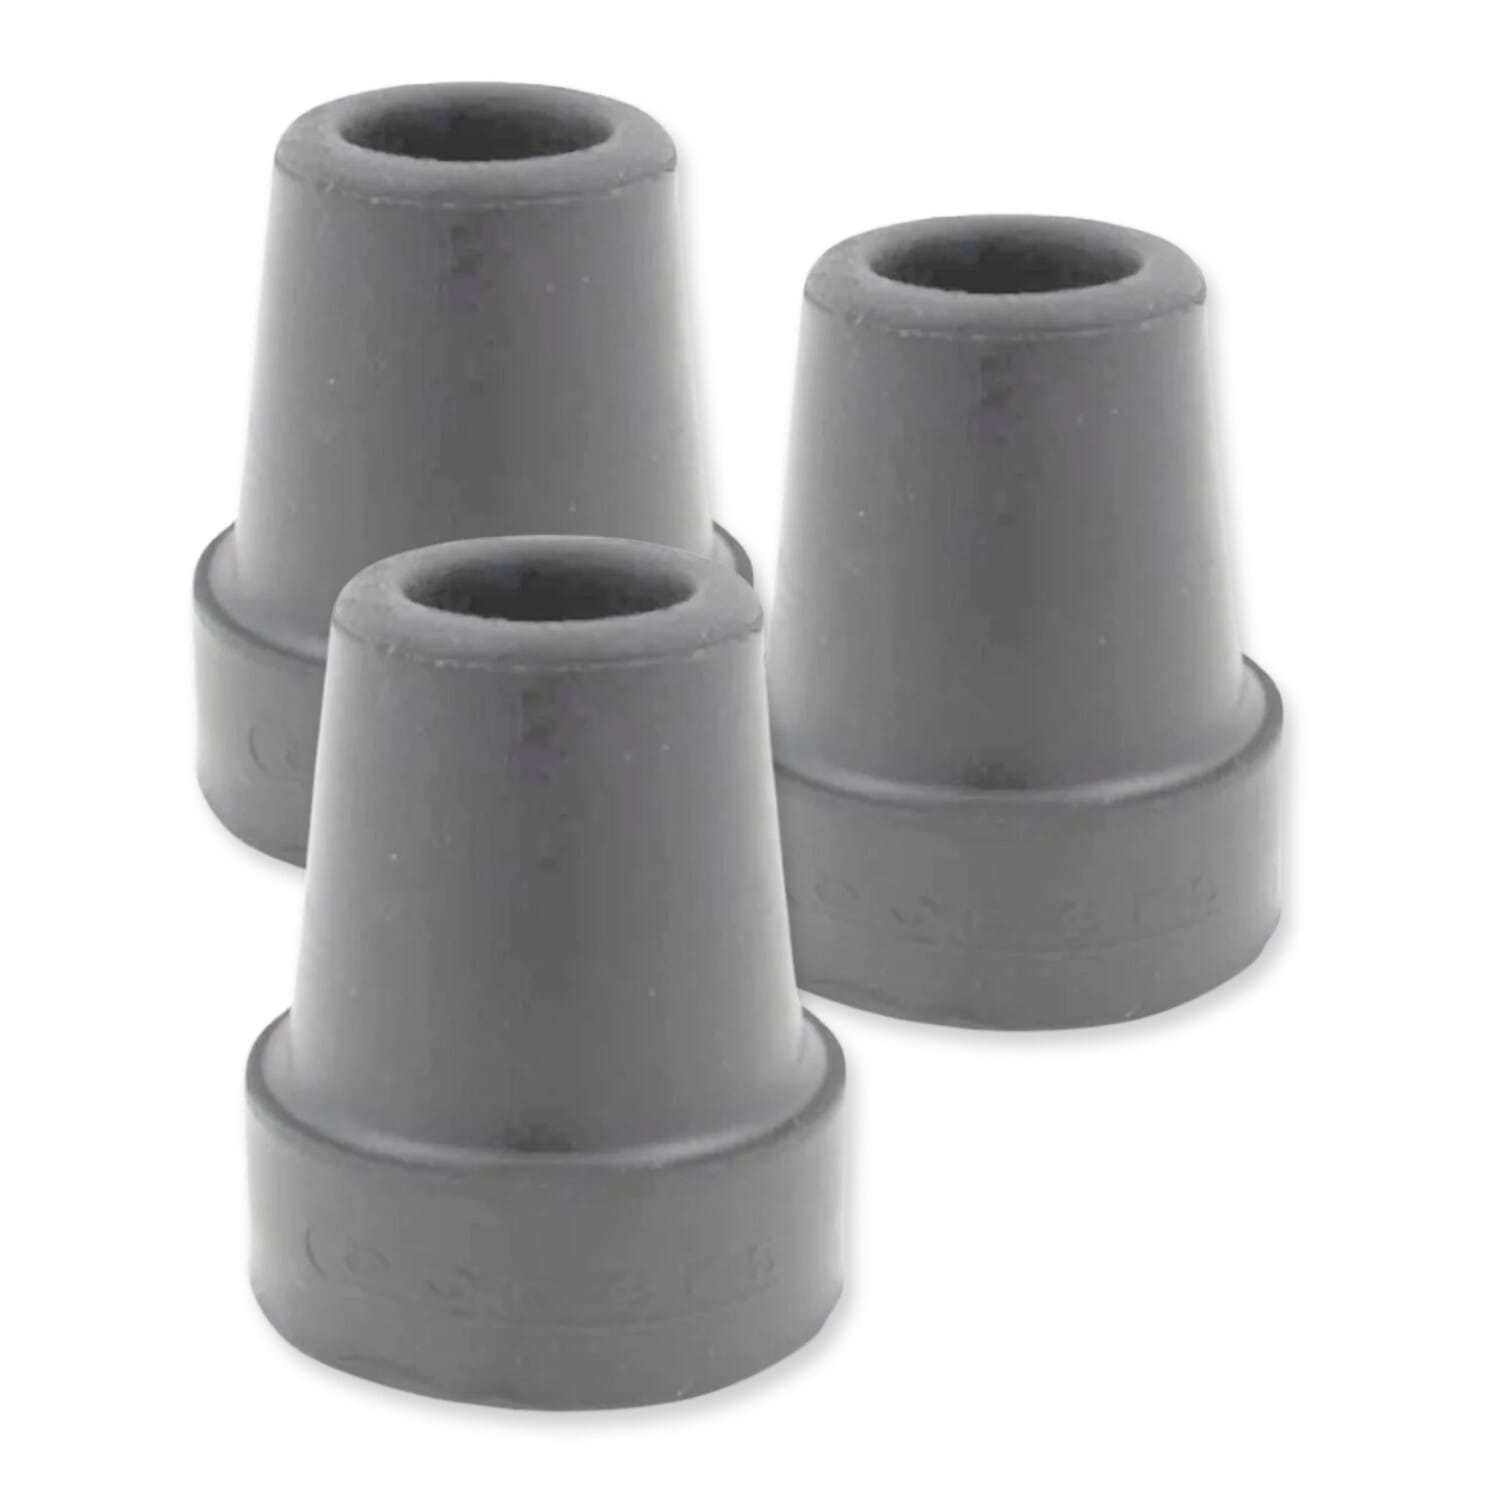 View Rubber Ends For Walking Sticks Rubber Ferrules 22mm grey pack of 3 information